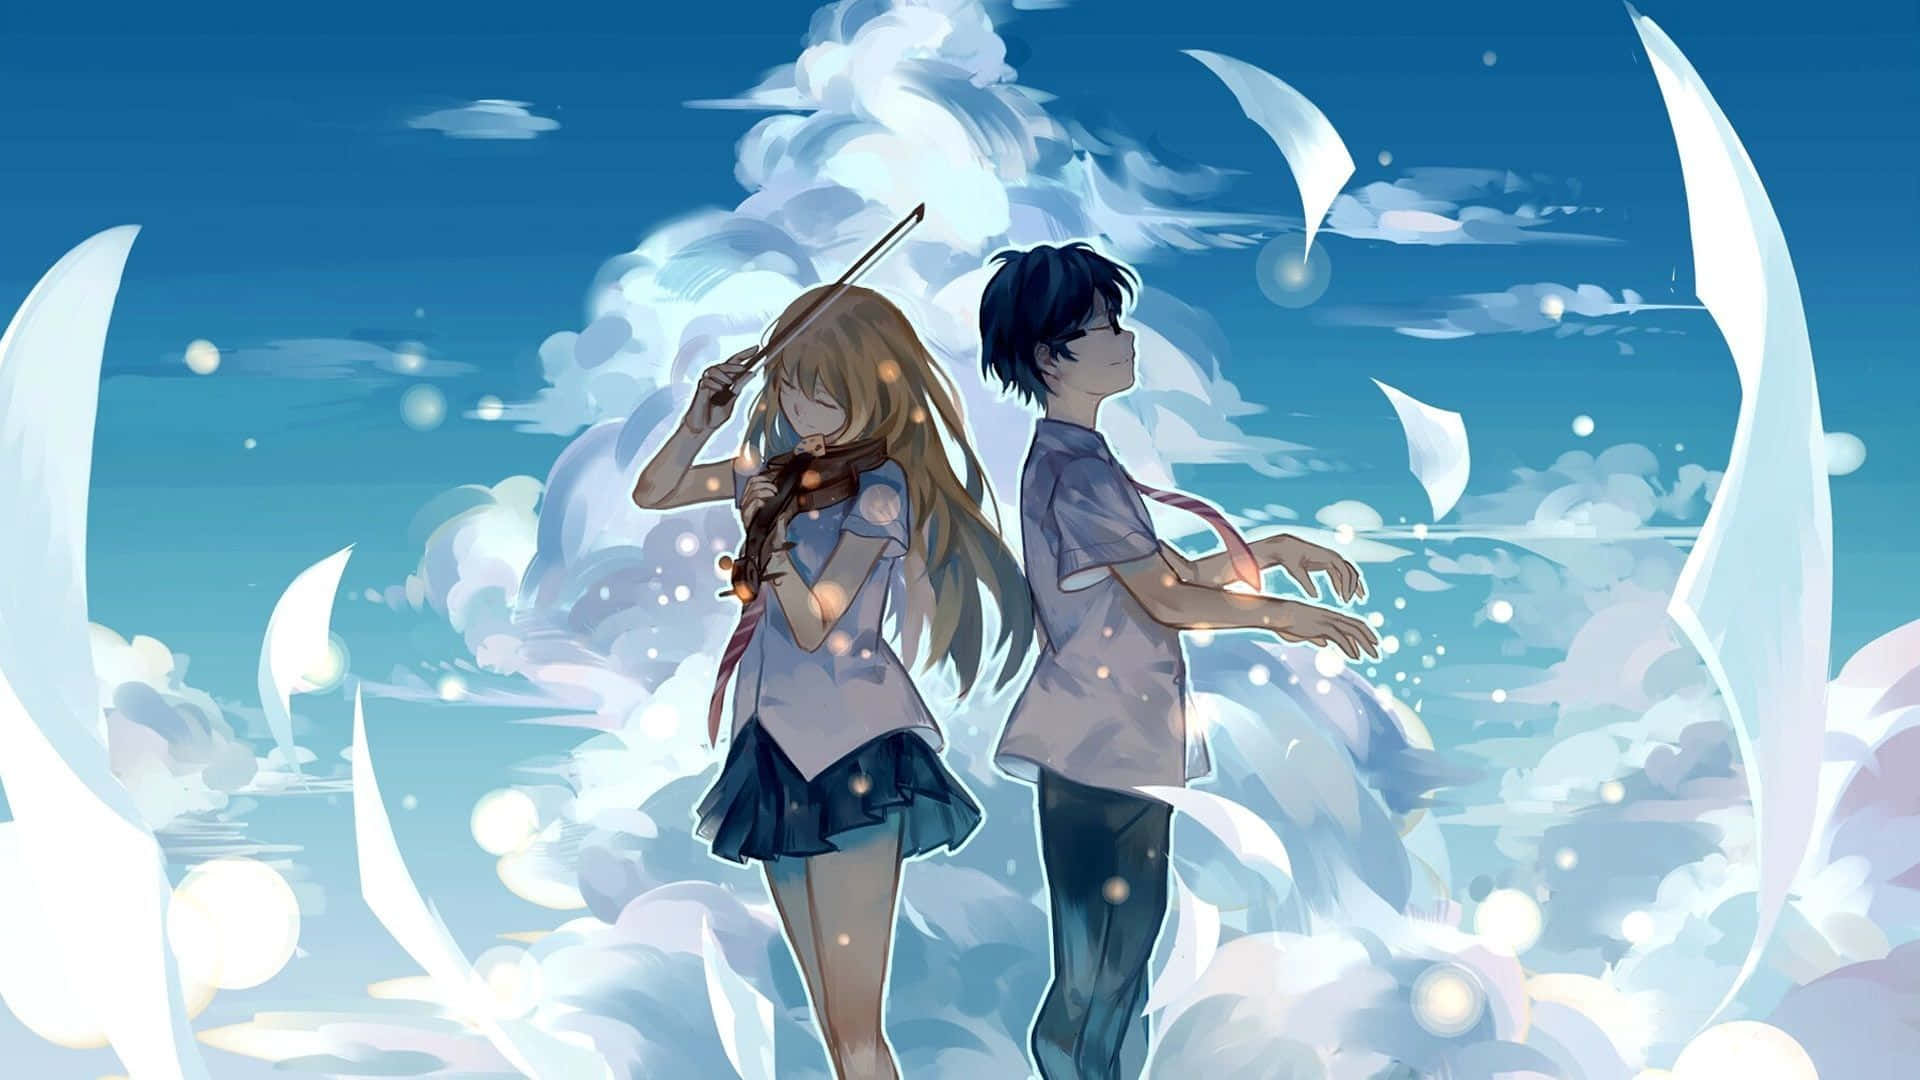 100+ Anime Wallpapers 1920x1080 Part 1  Hd anime wallpapers, Anime music,  Music wallpaper